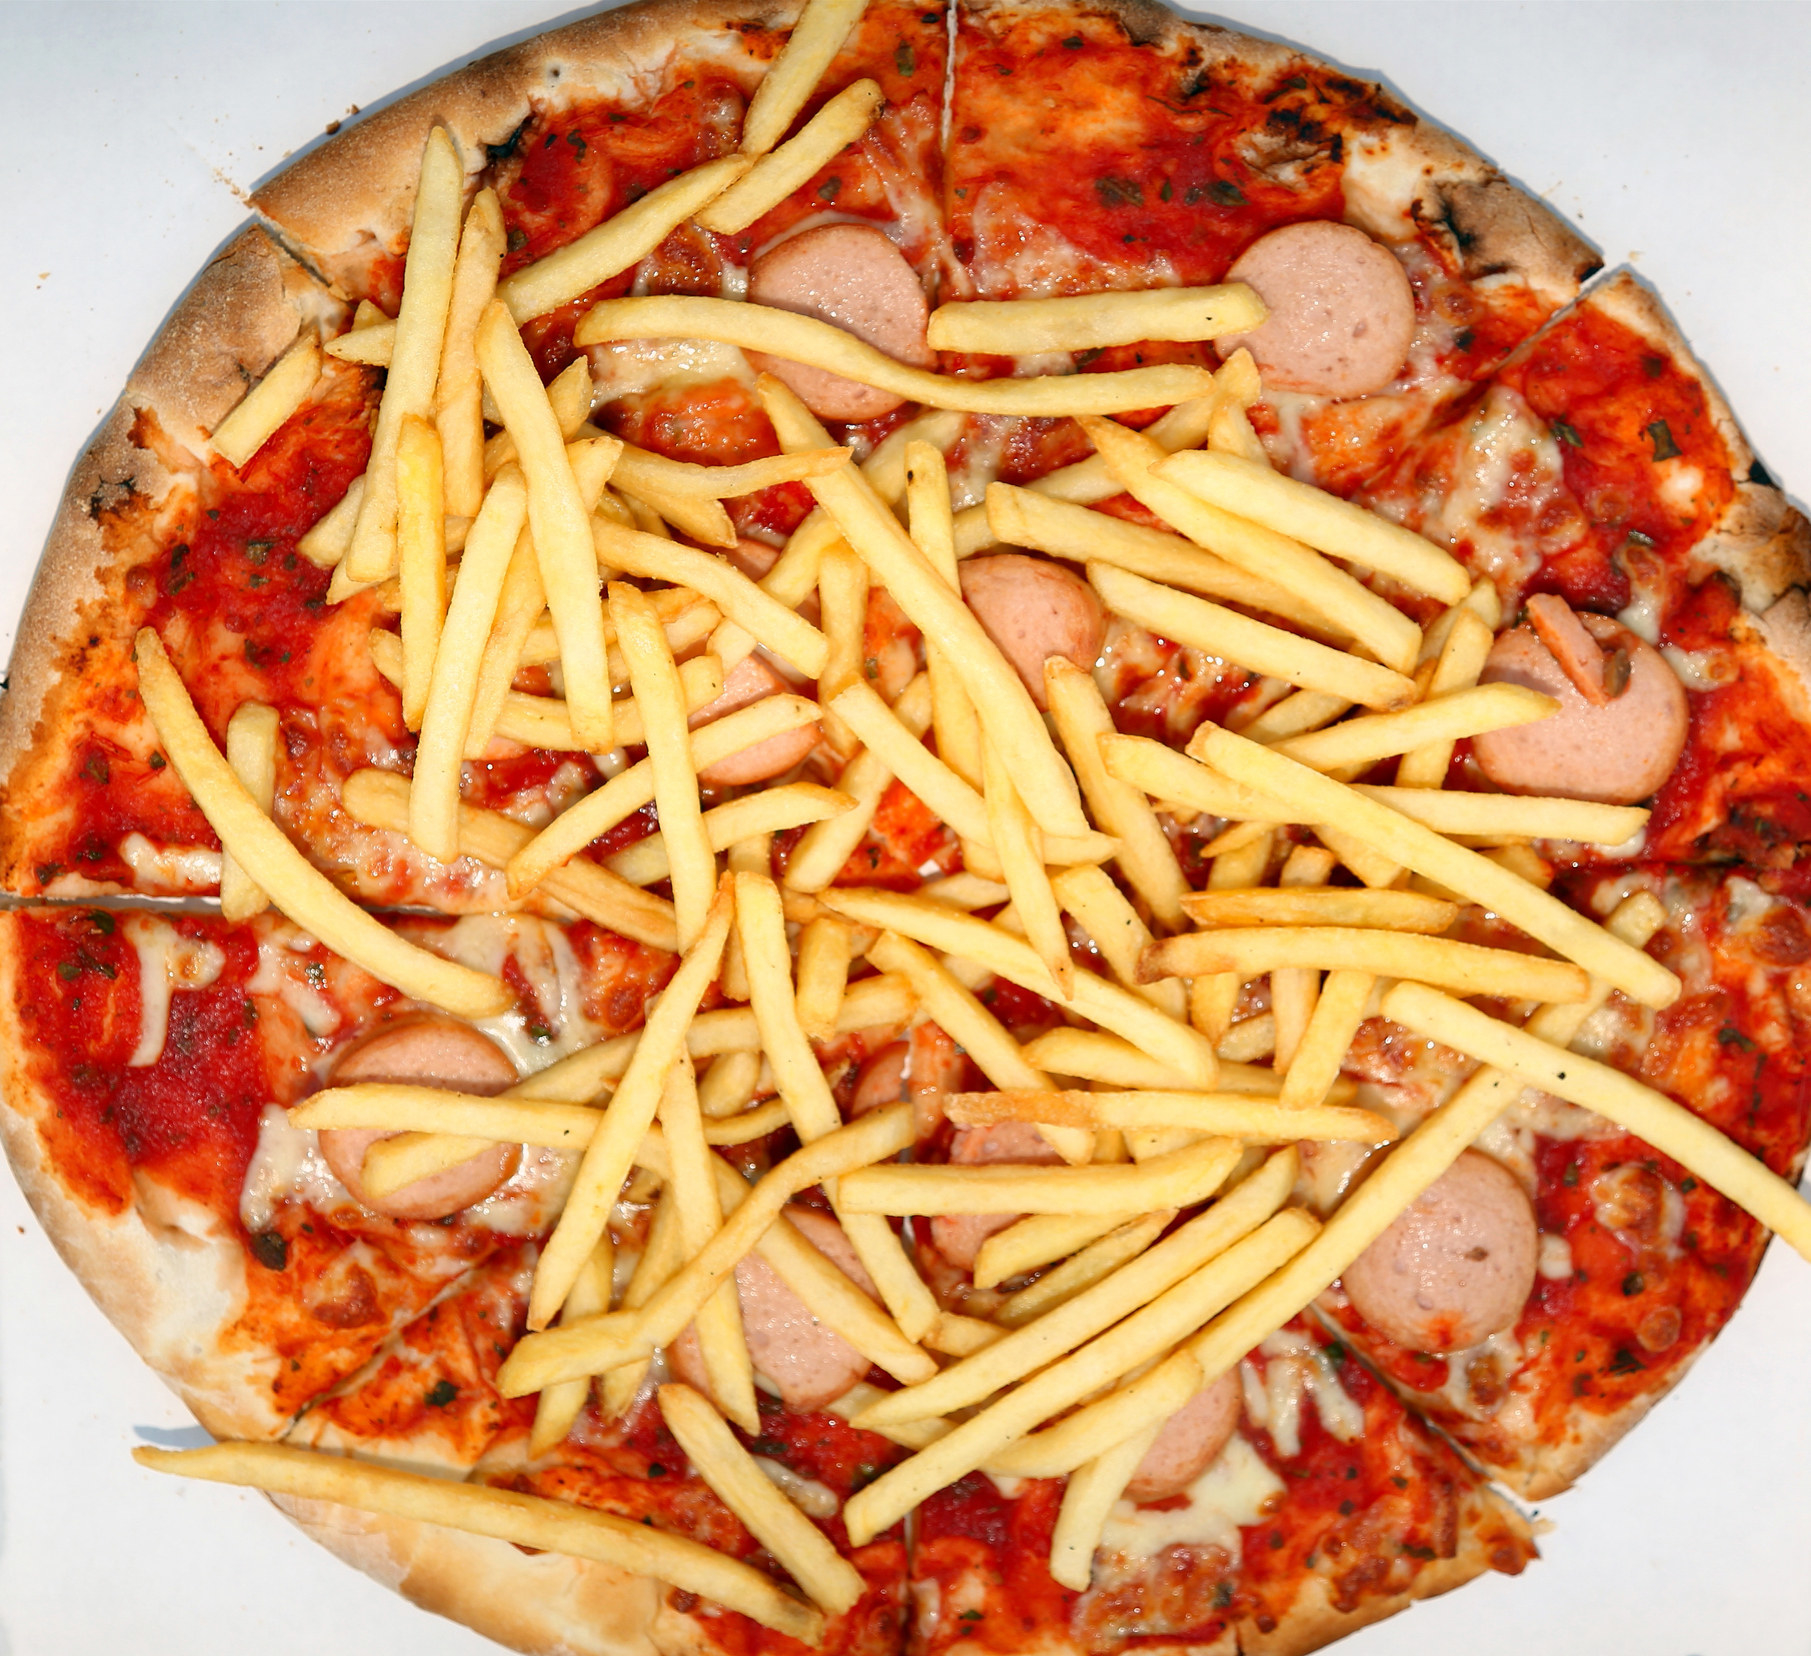 Pizza with fries and sliced hot dogs.